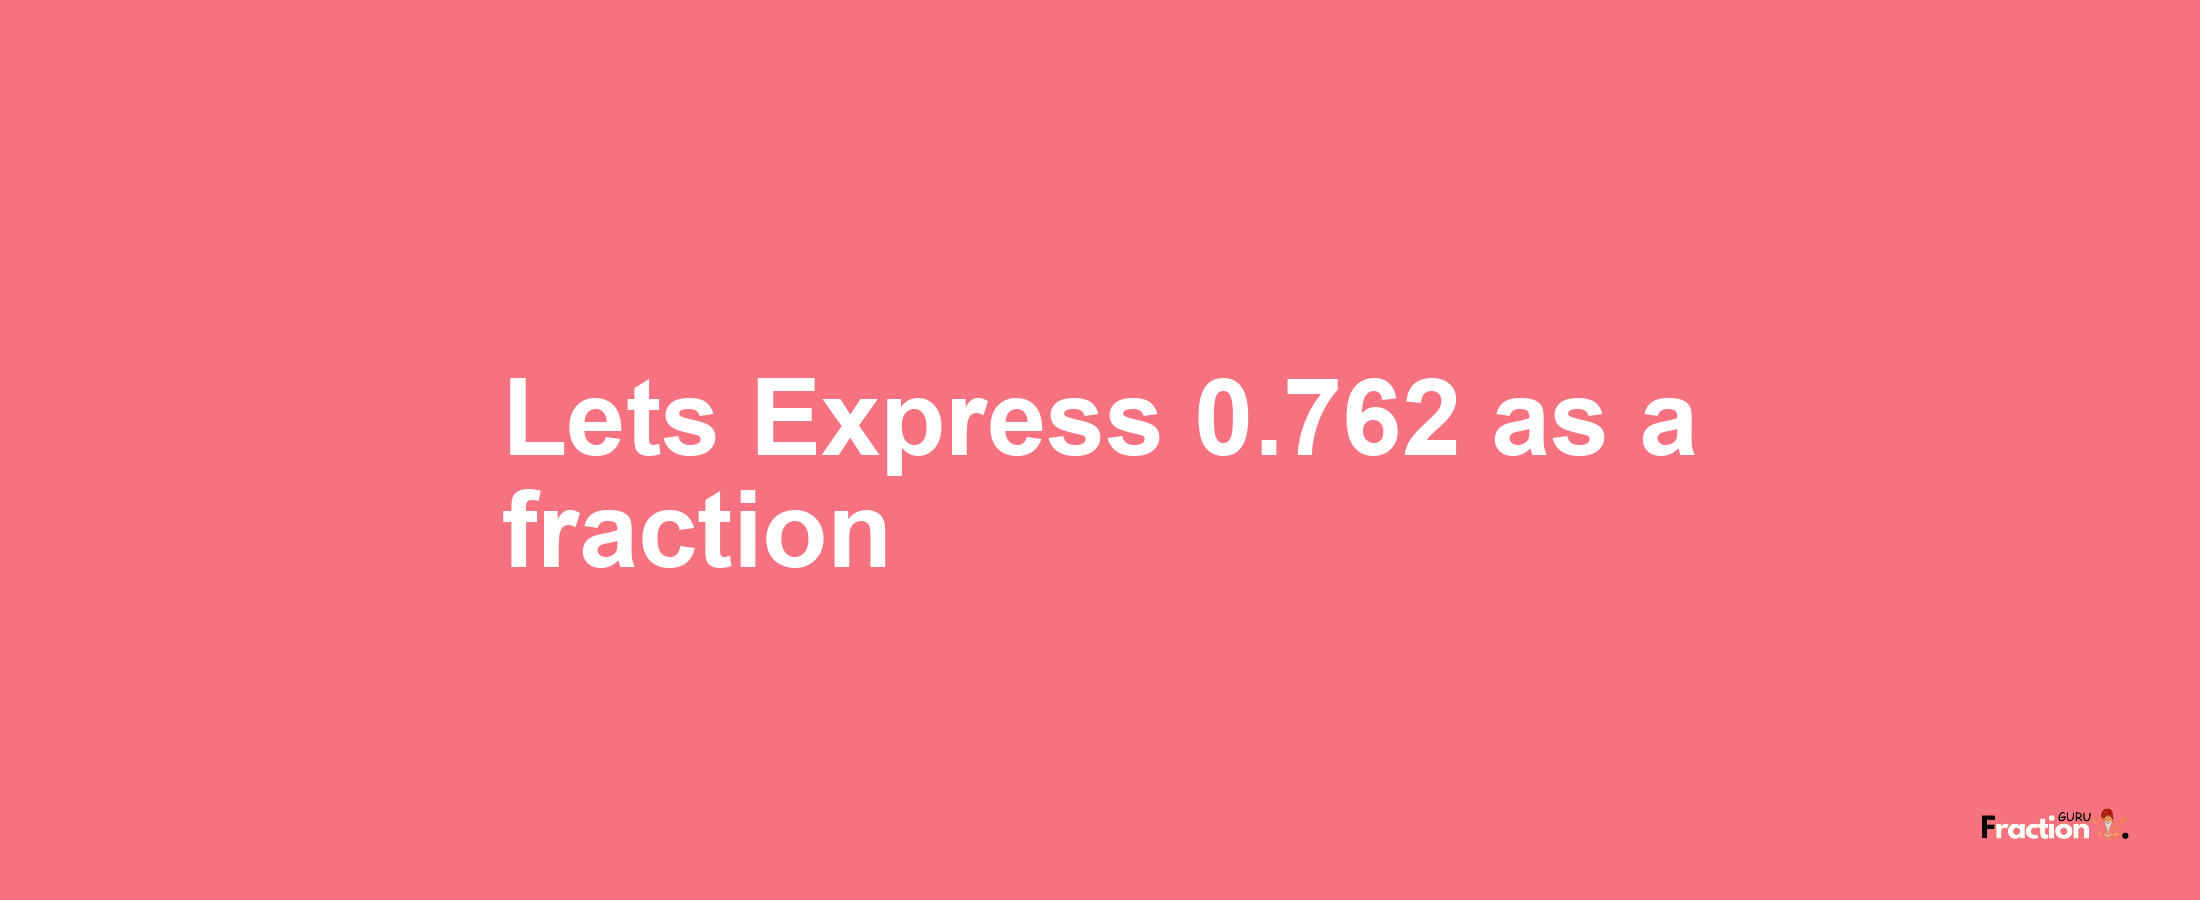 Lets Express 0.762 as afraction